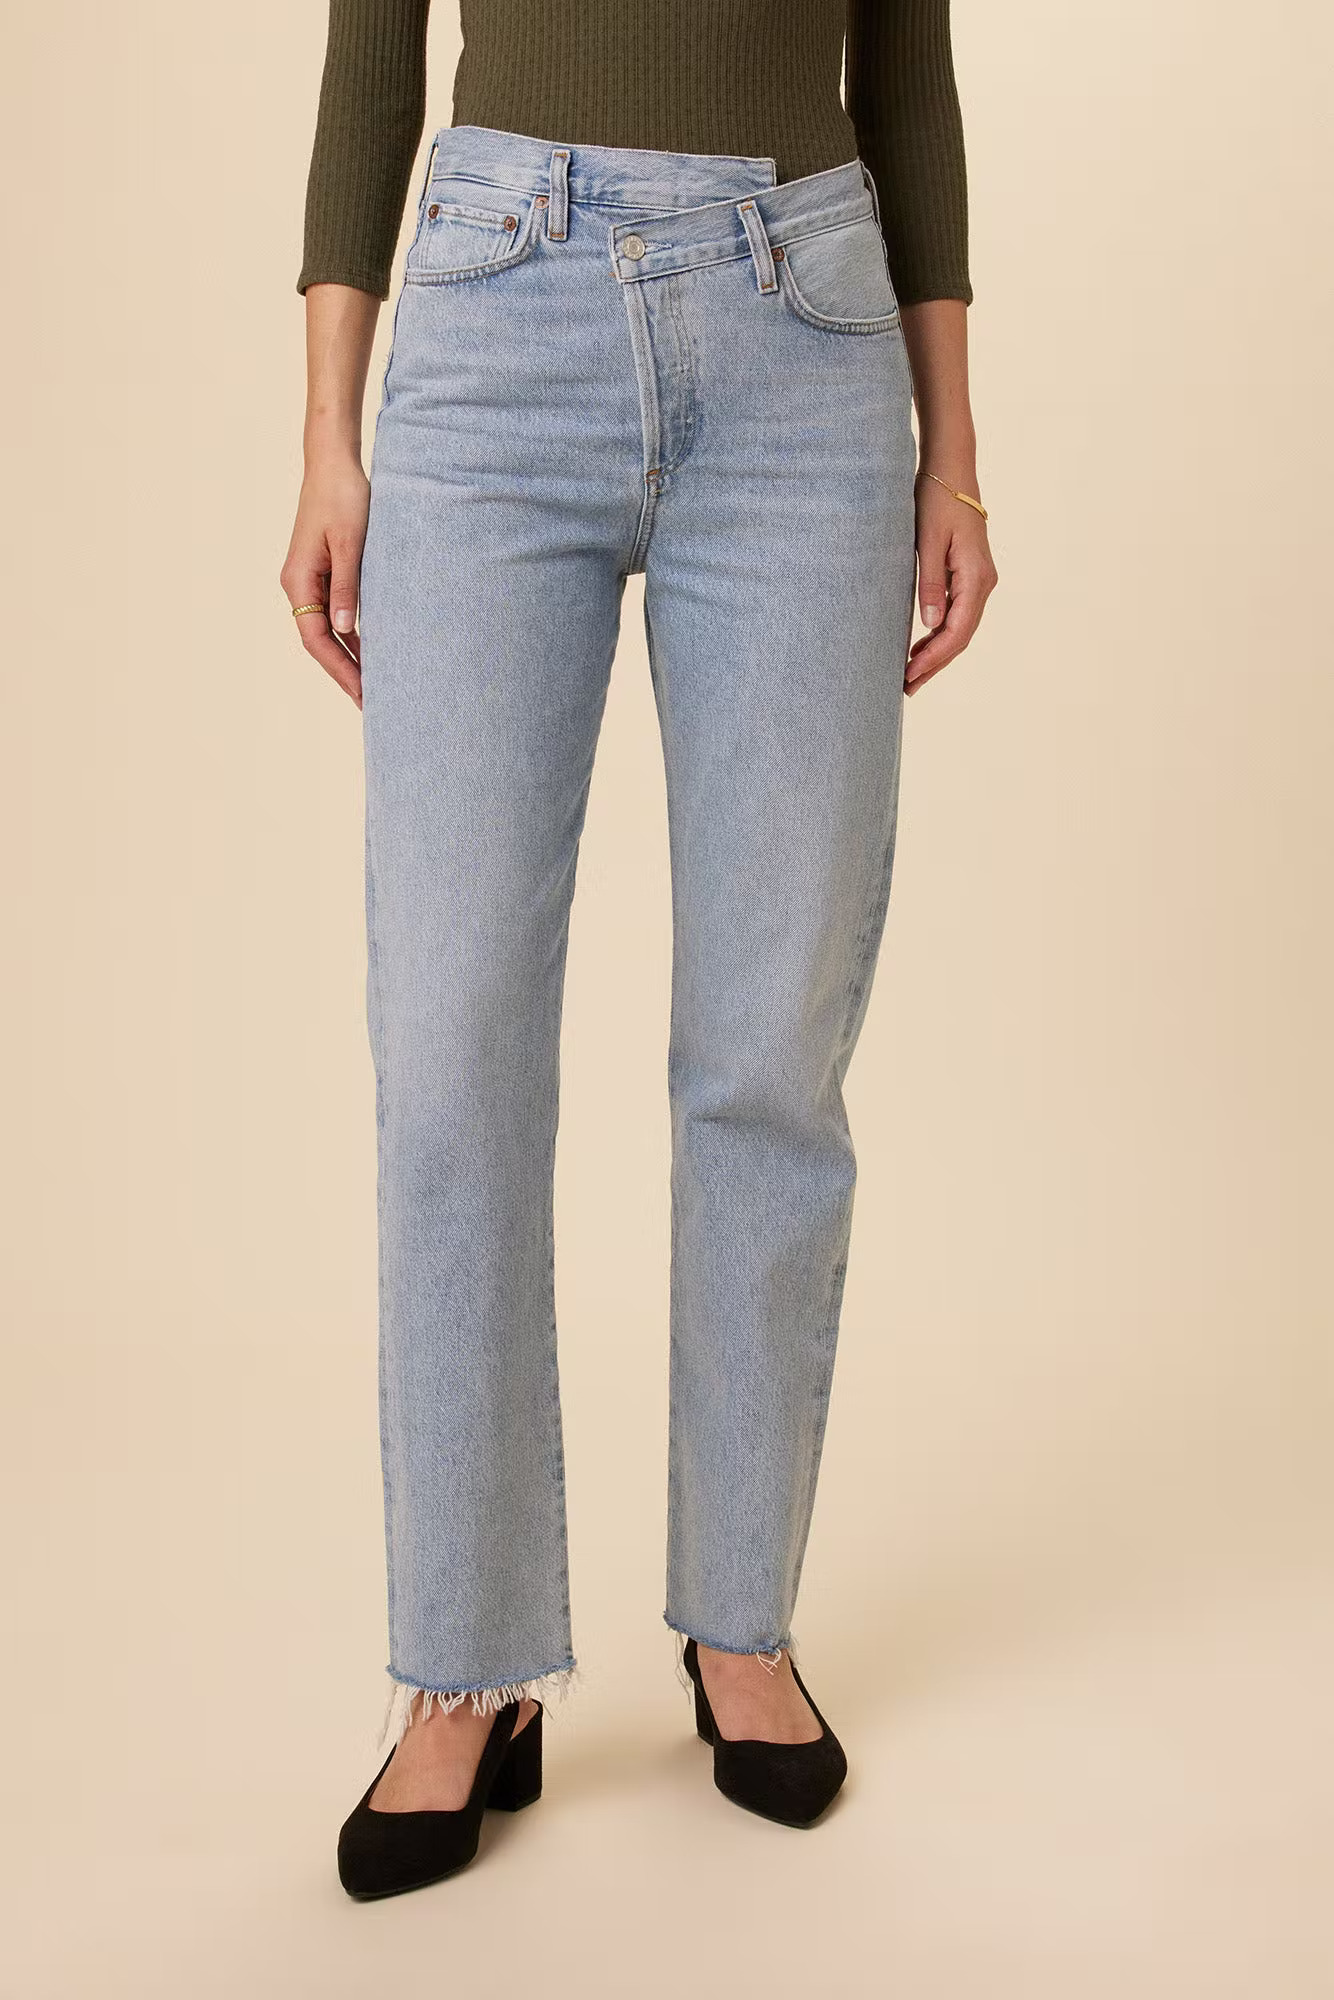 AGOLDE Criss Cross Straight Jeans (image by amour vert)